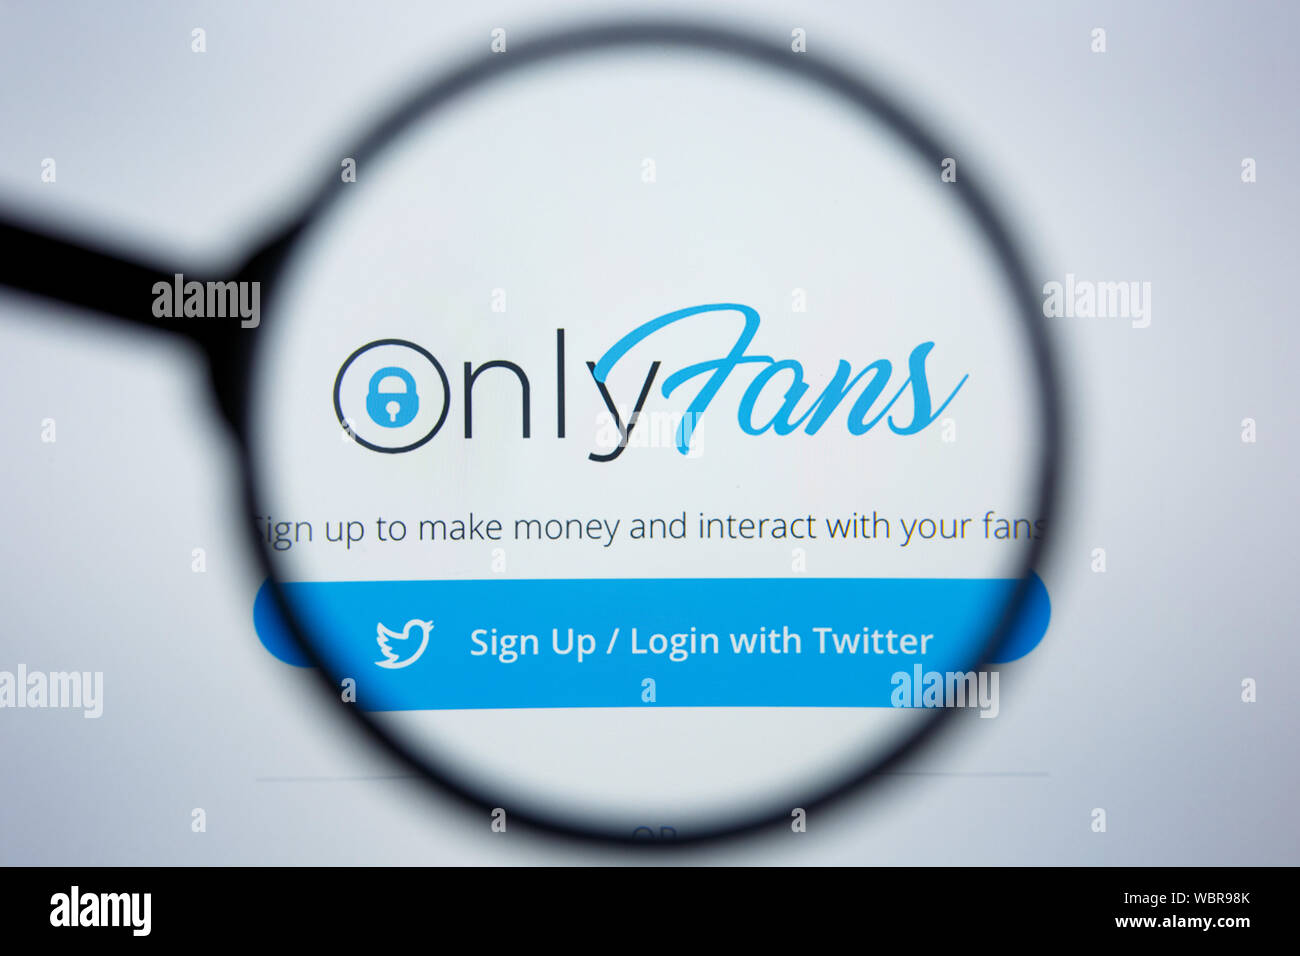 How to buy onlyfans stock